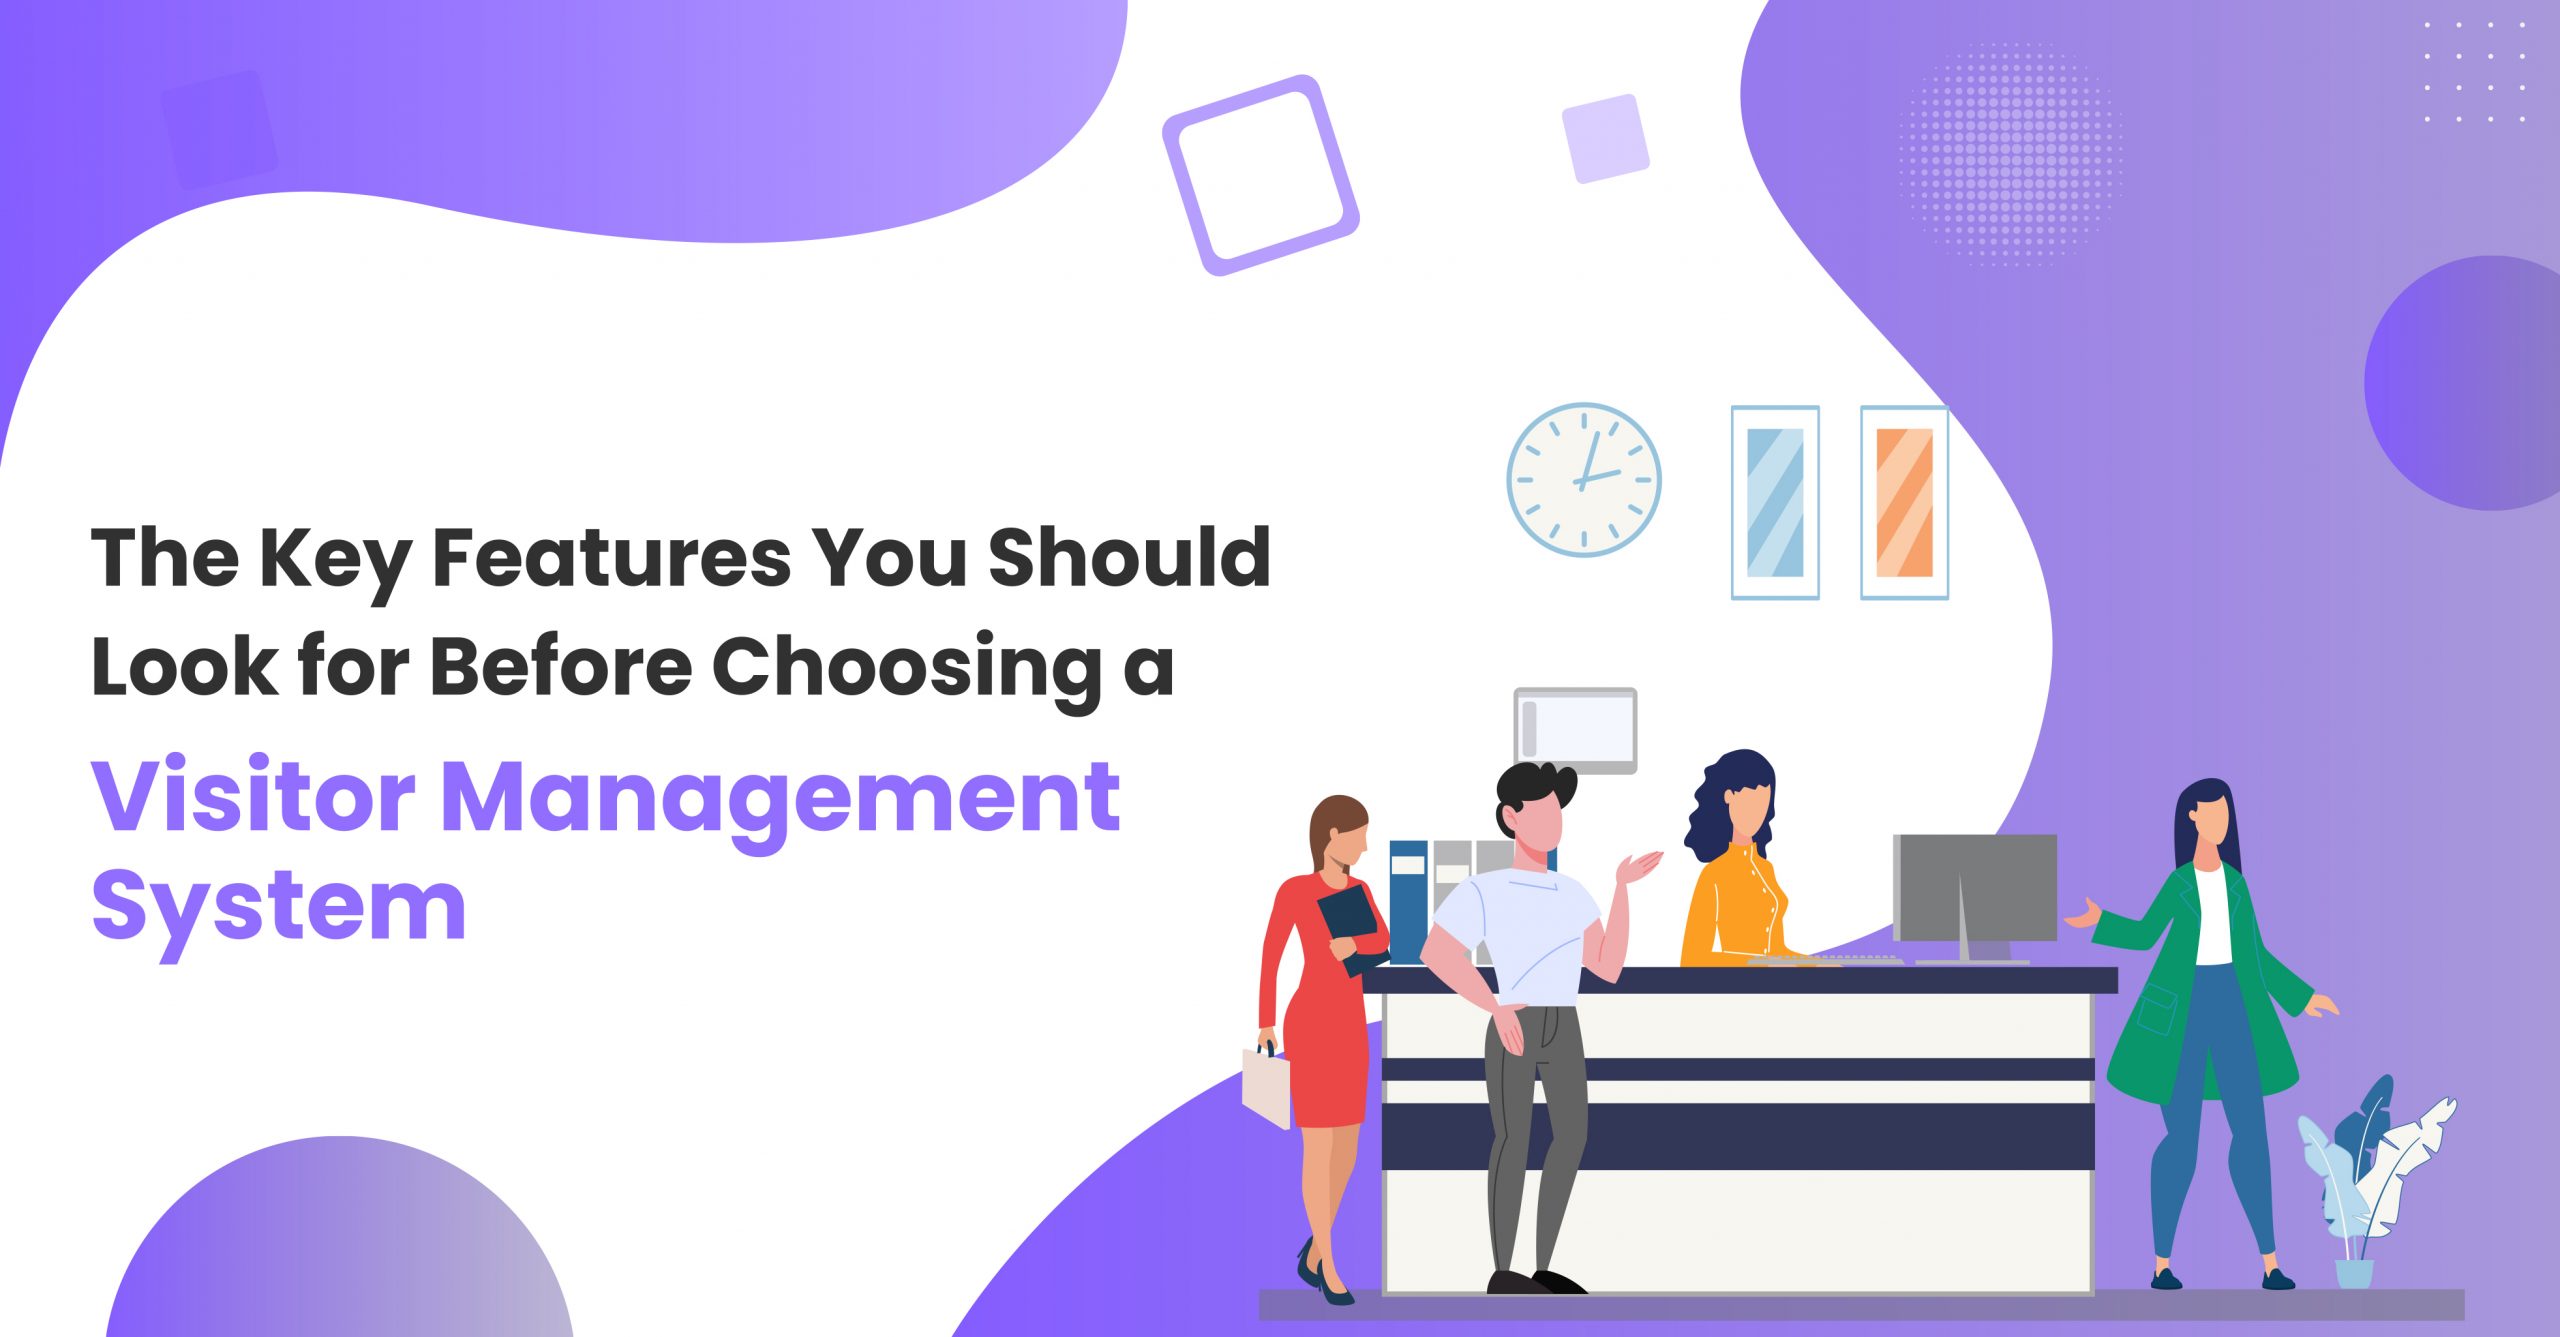 What are the Key Features You Should Look for Before Choosing a Visitor Management System